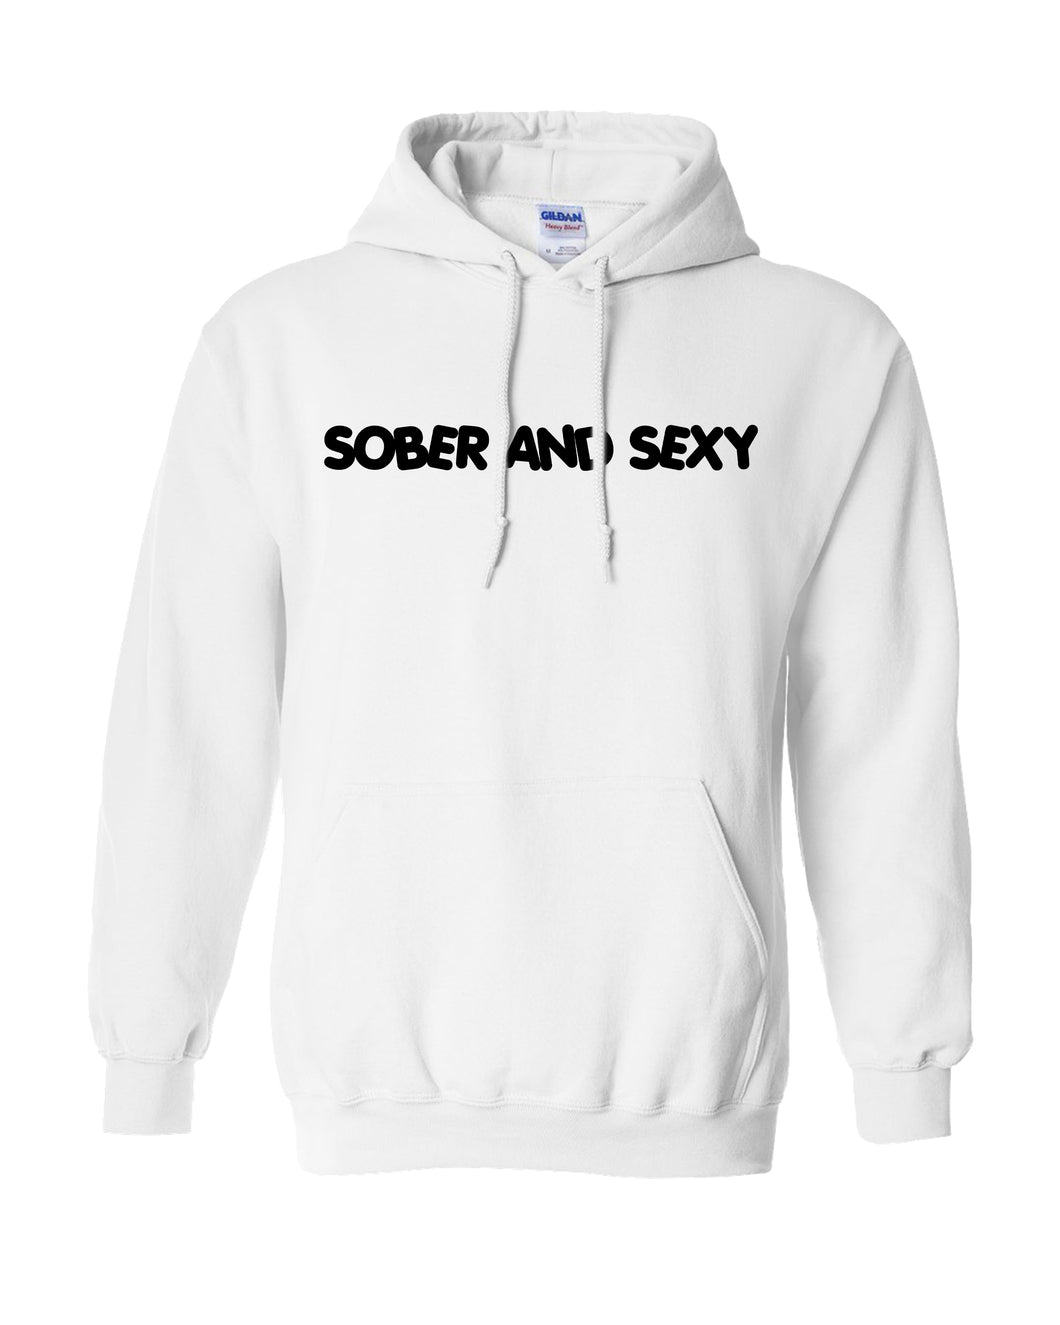 Sober and Sexy White Hoodie